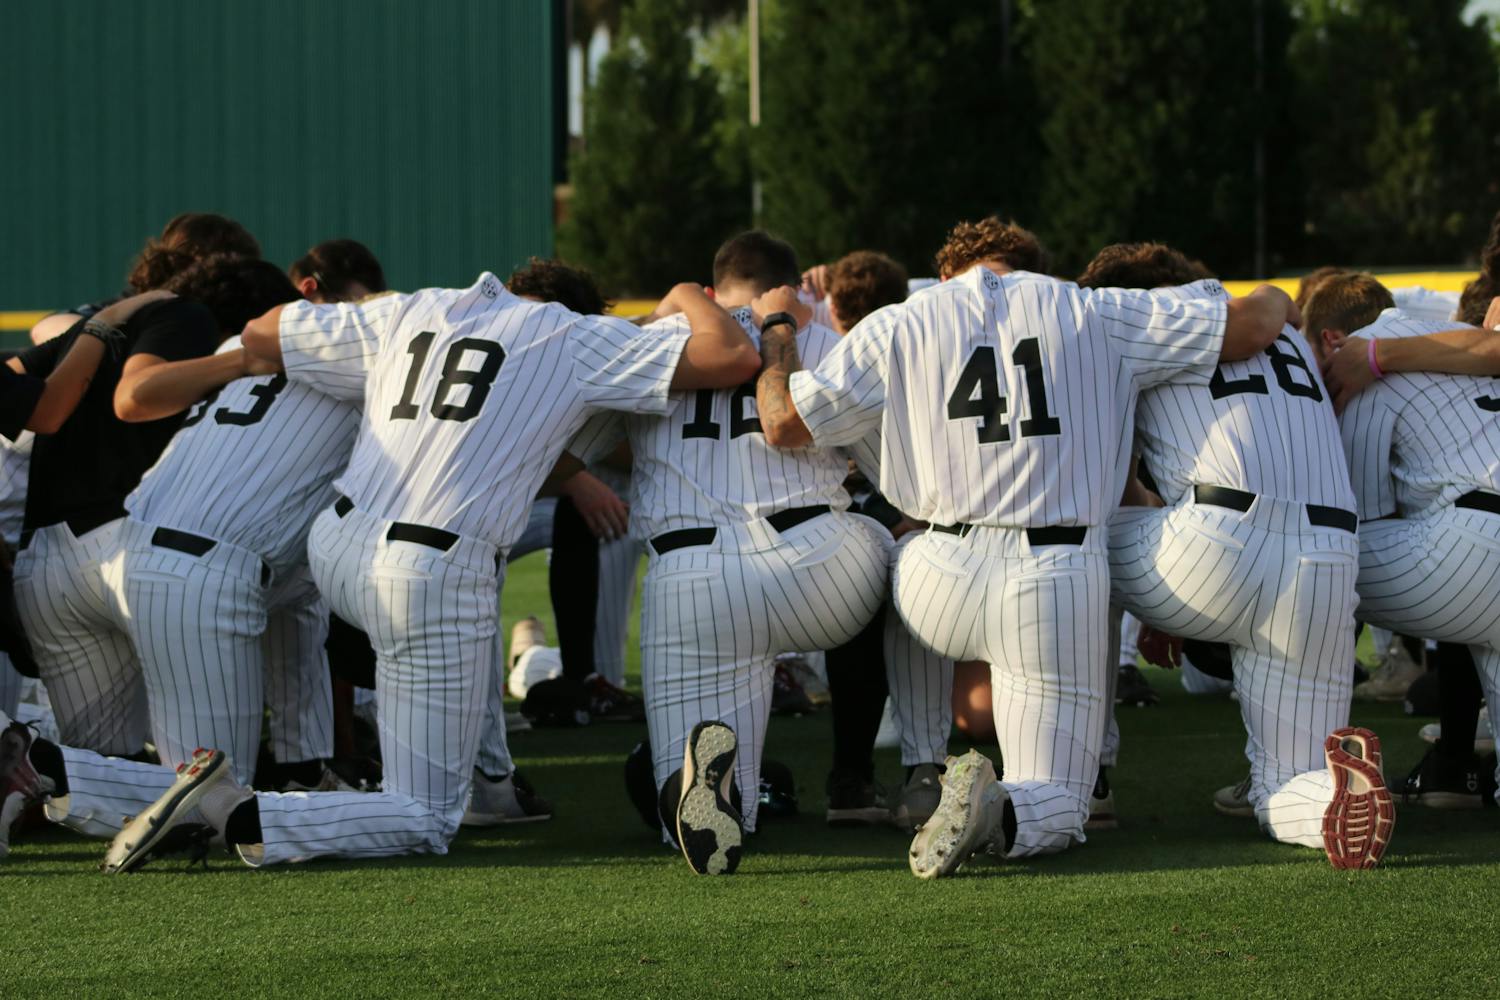 FILE — The University of South Carolina baseball team circles up prior to its game against the University of Florida on April 21, 2023. The Gamecocks defeated the Gators 5-2 and ended its 鶹С򽴫ý with a record of 42-21.